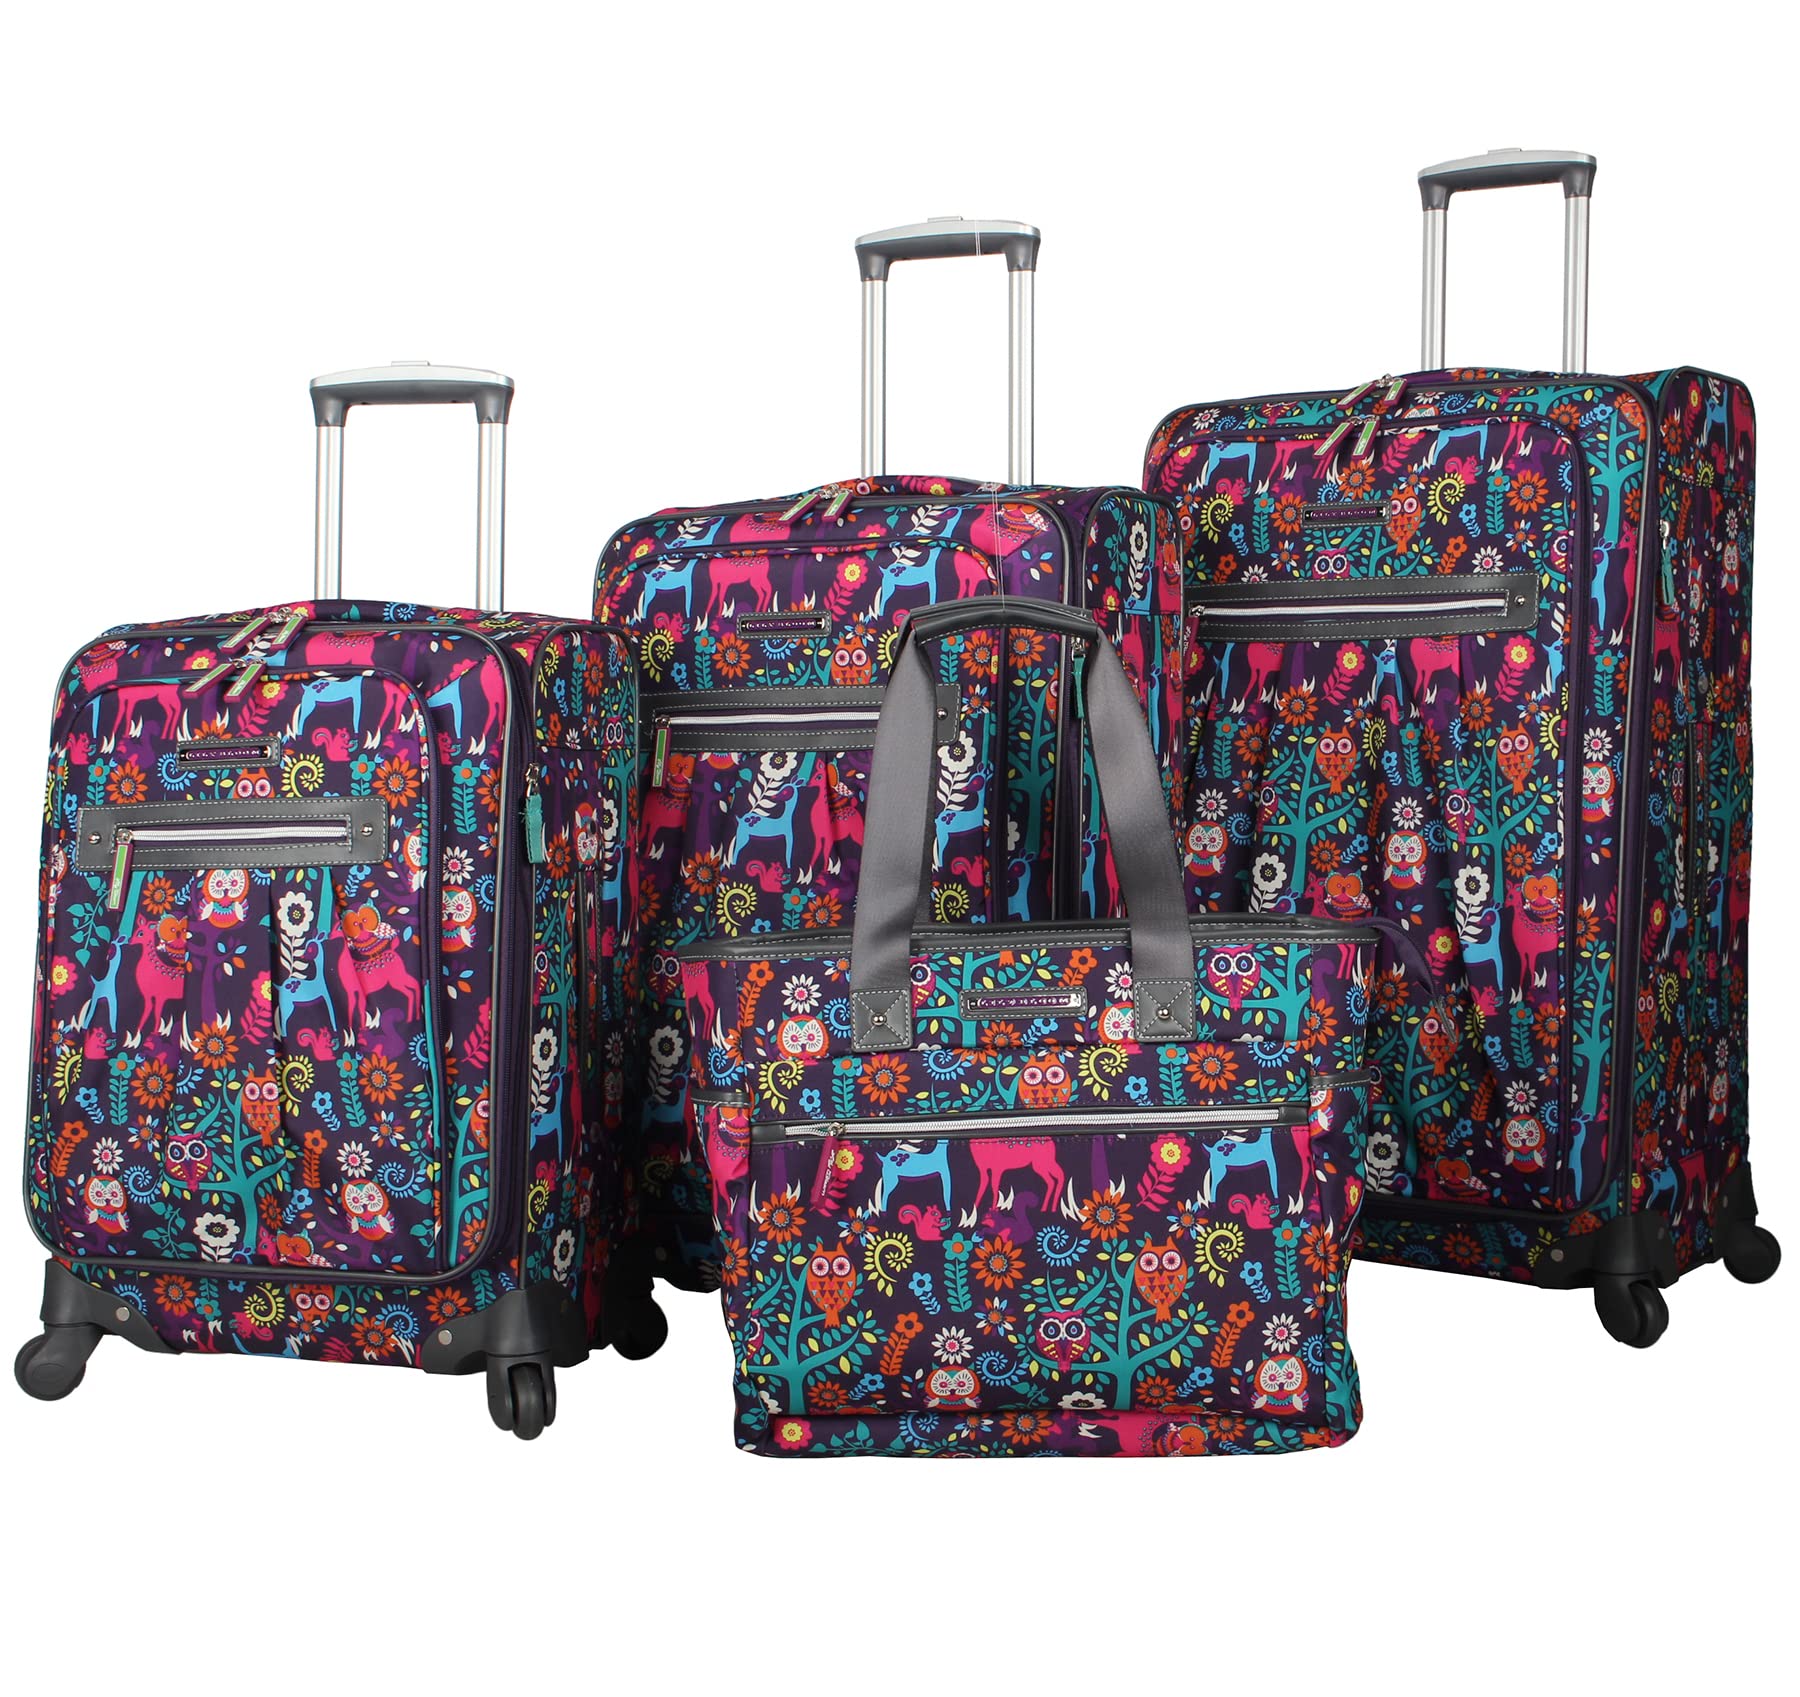 Lily Bloom Luggage Set 4 Piece Suitcase Collection With Spinner Wheels For Woman (Wildwoods)